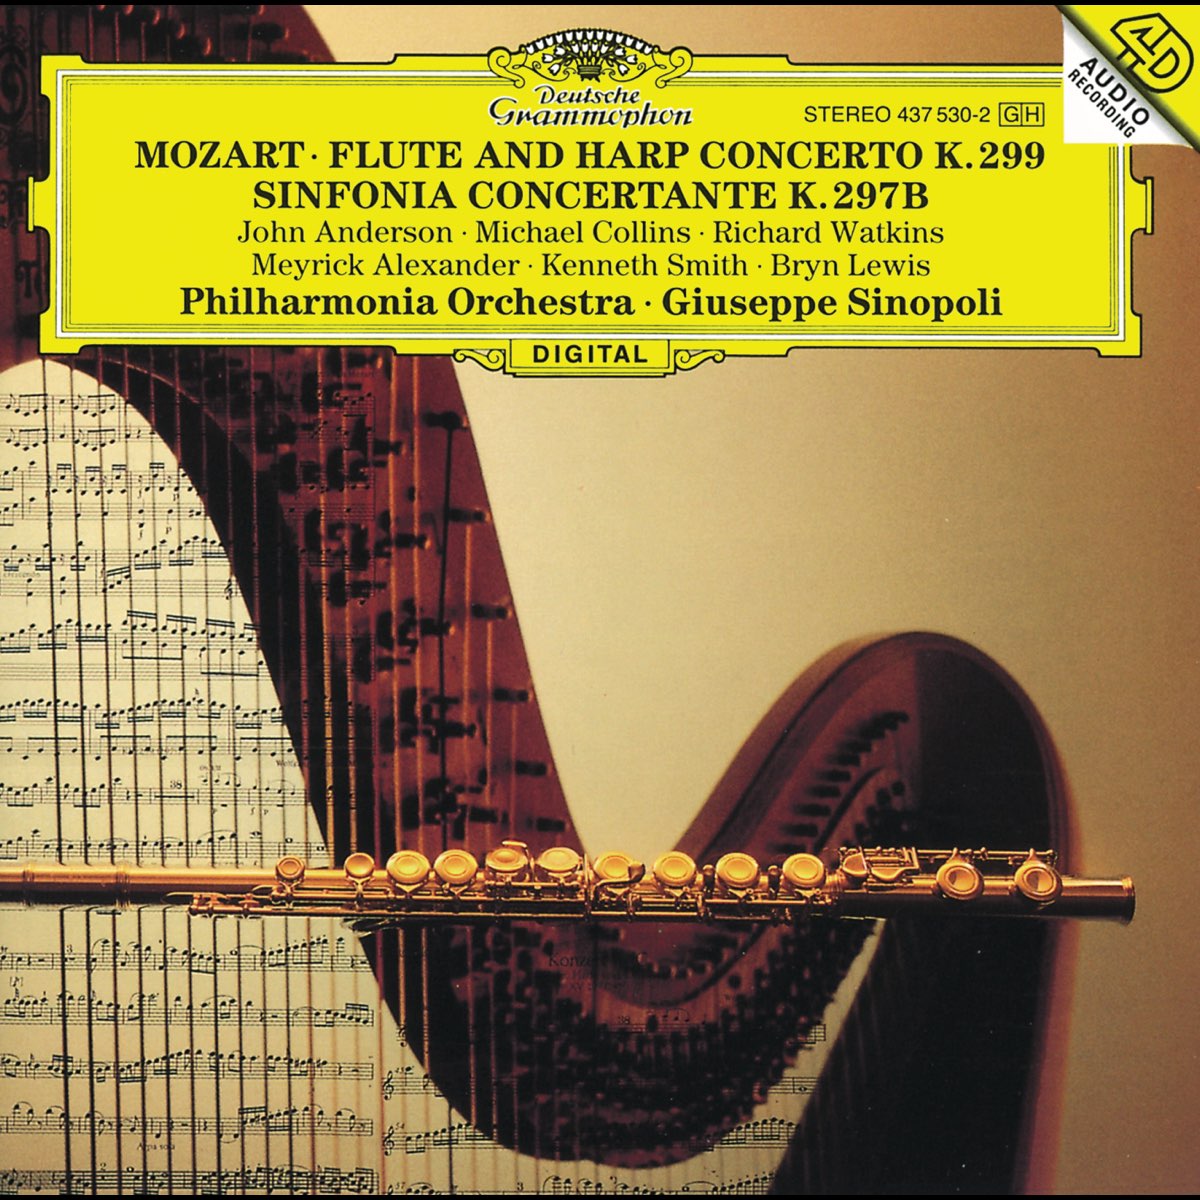 Mozart: Sinfonia Concertante. Mozart Flute Harp CD. Concert b dur for Horn and Orchestra. Concertos for Oboe and Flute.